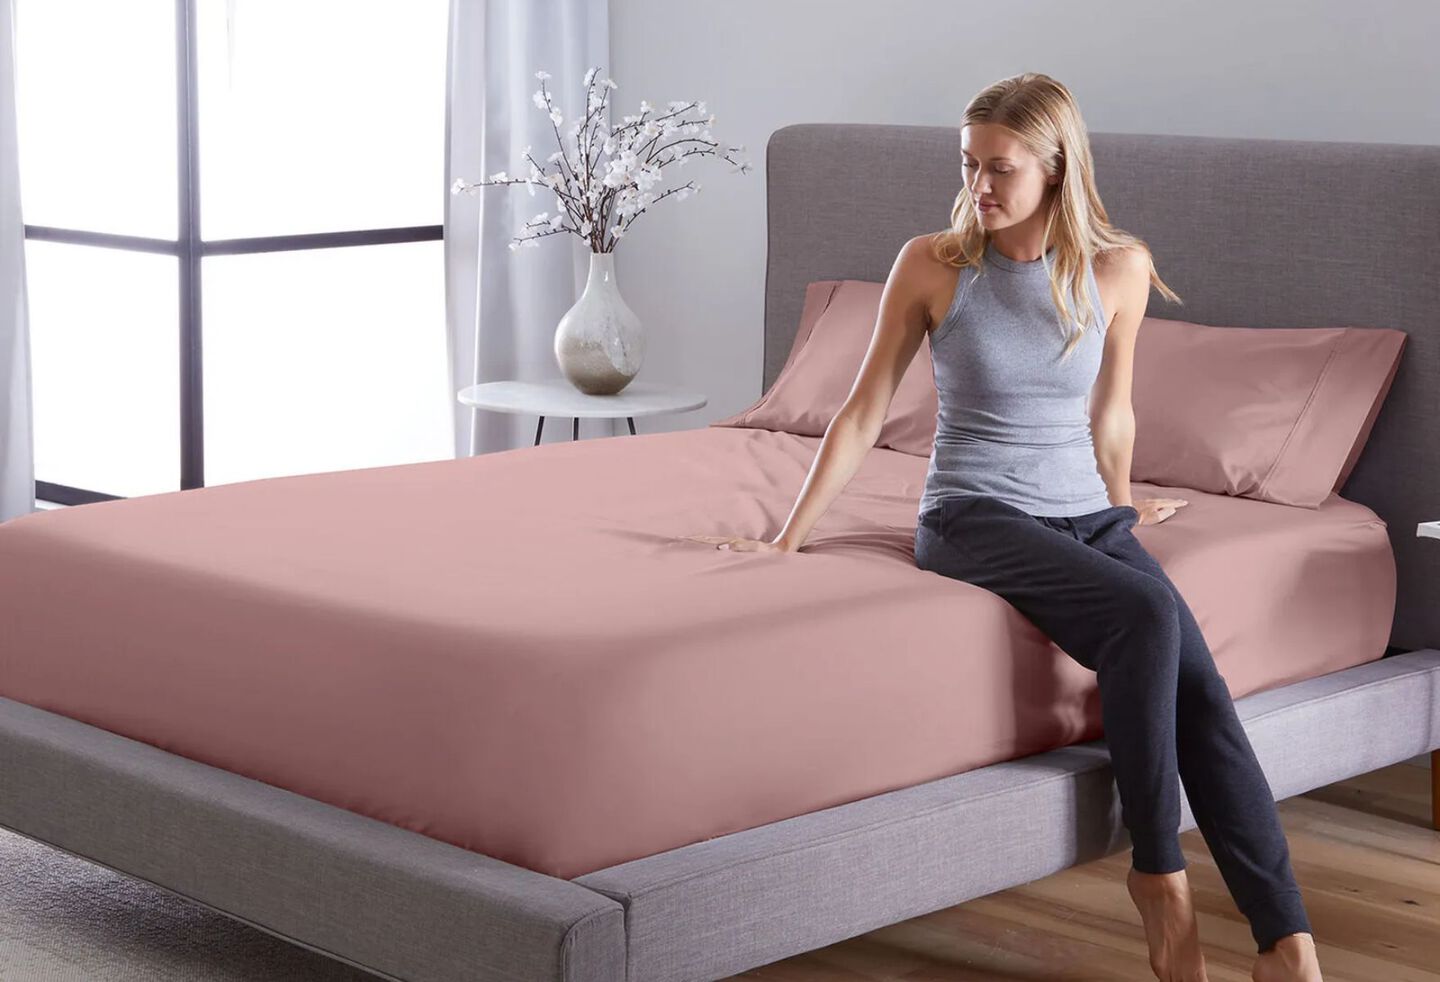 Woman sitting on top of a bed made with pink sheets and pillows